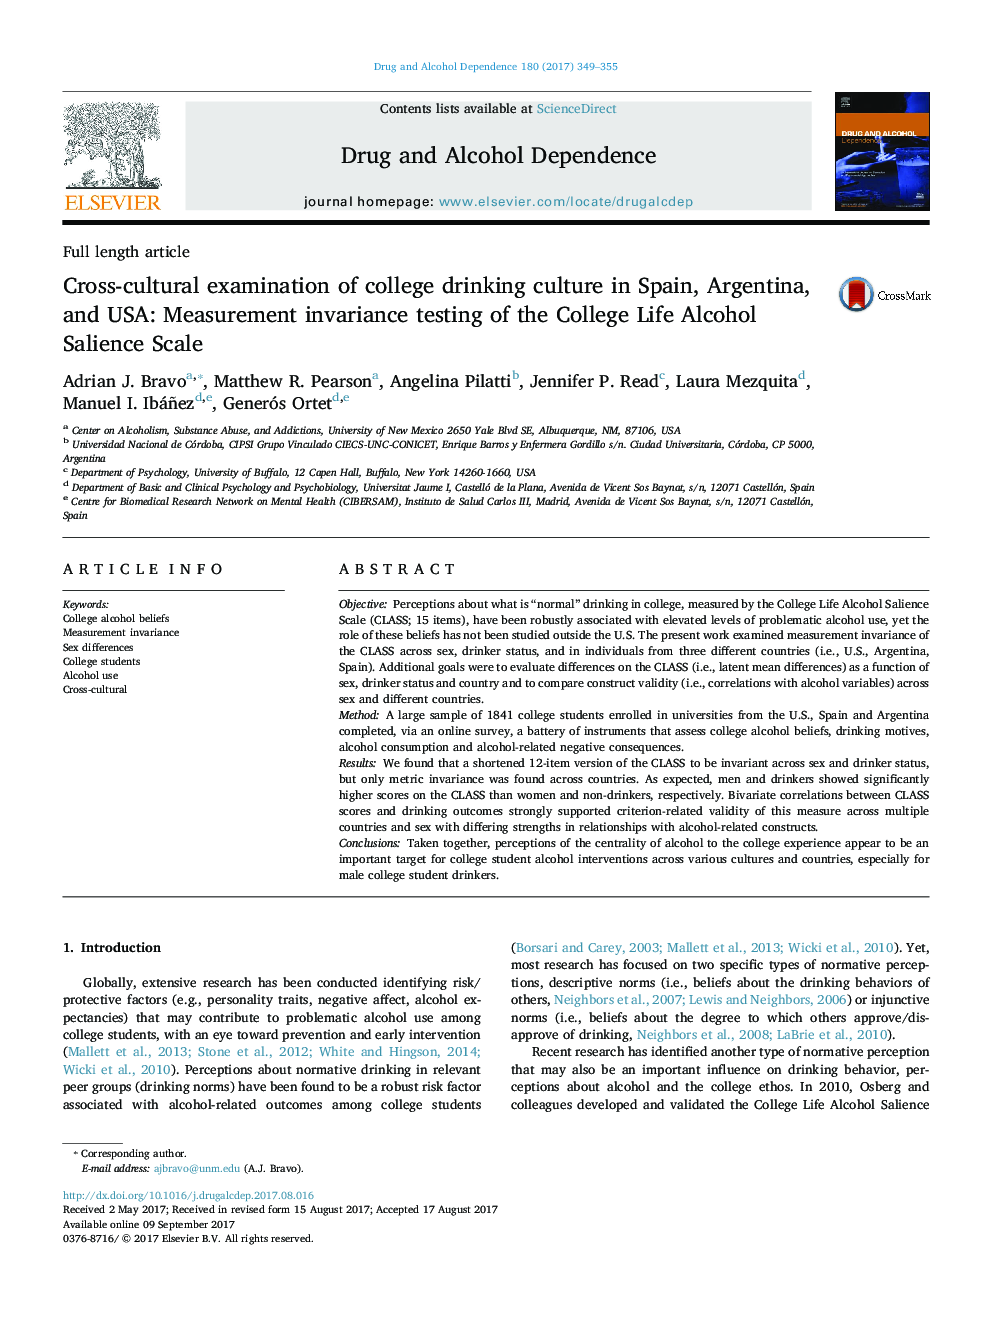 Cross-cultural examination of college drinking culture in Spain, Argentina, and USA: Measurement invariance testing of the College Life Alcohol Salience Scale